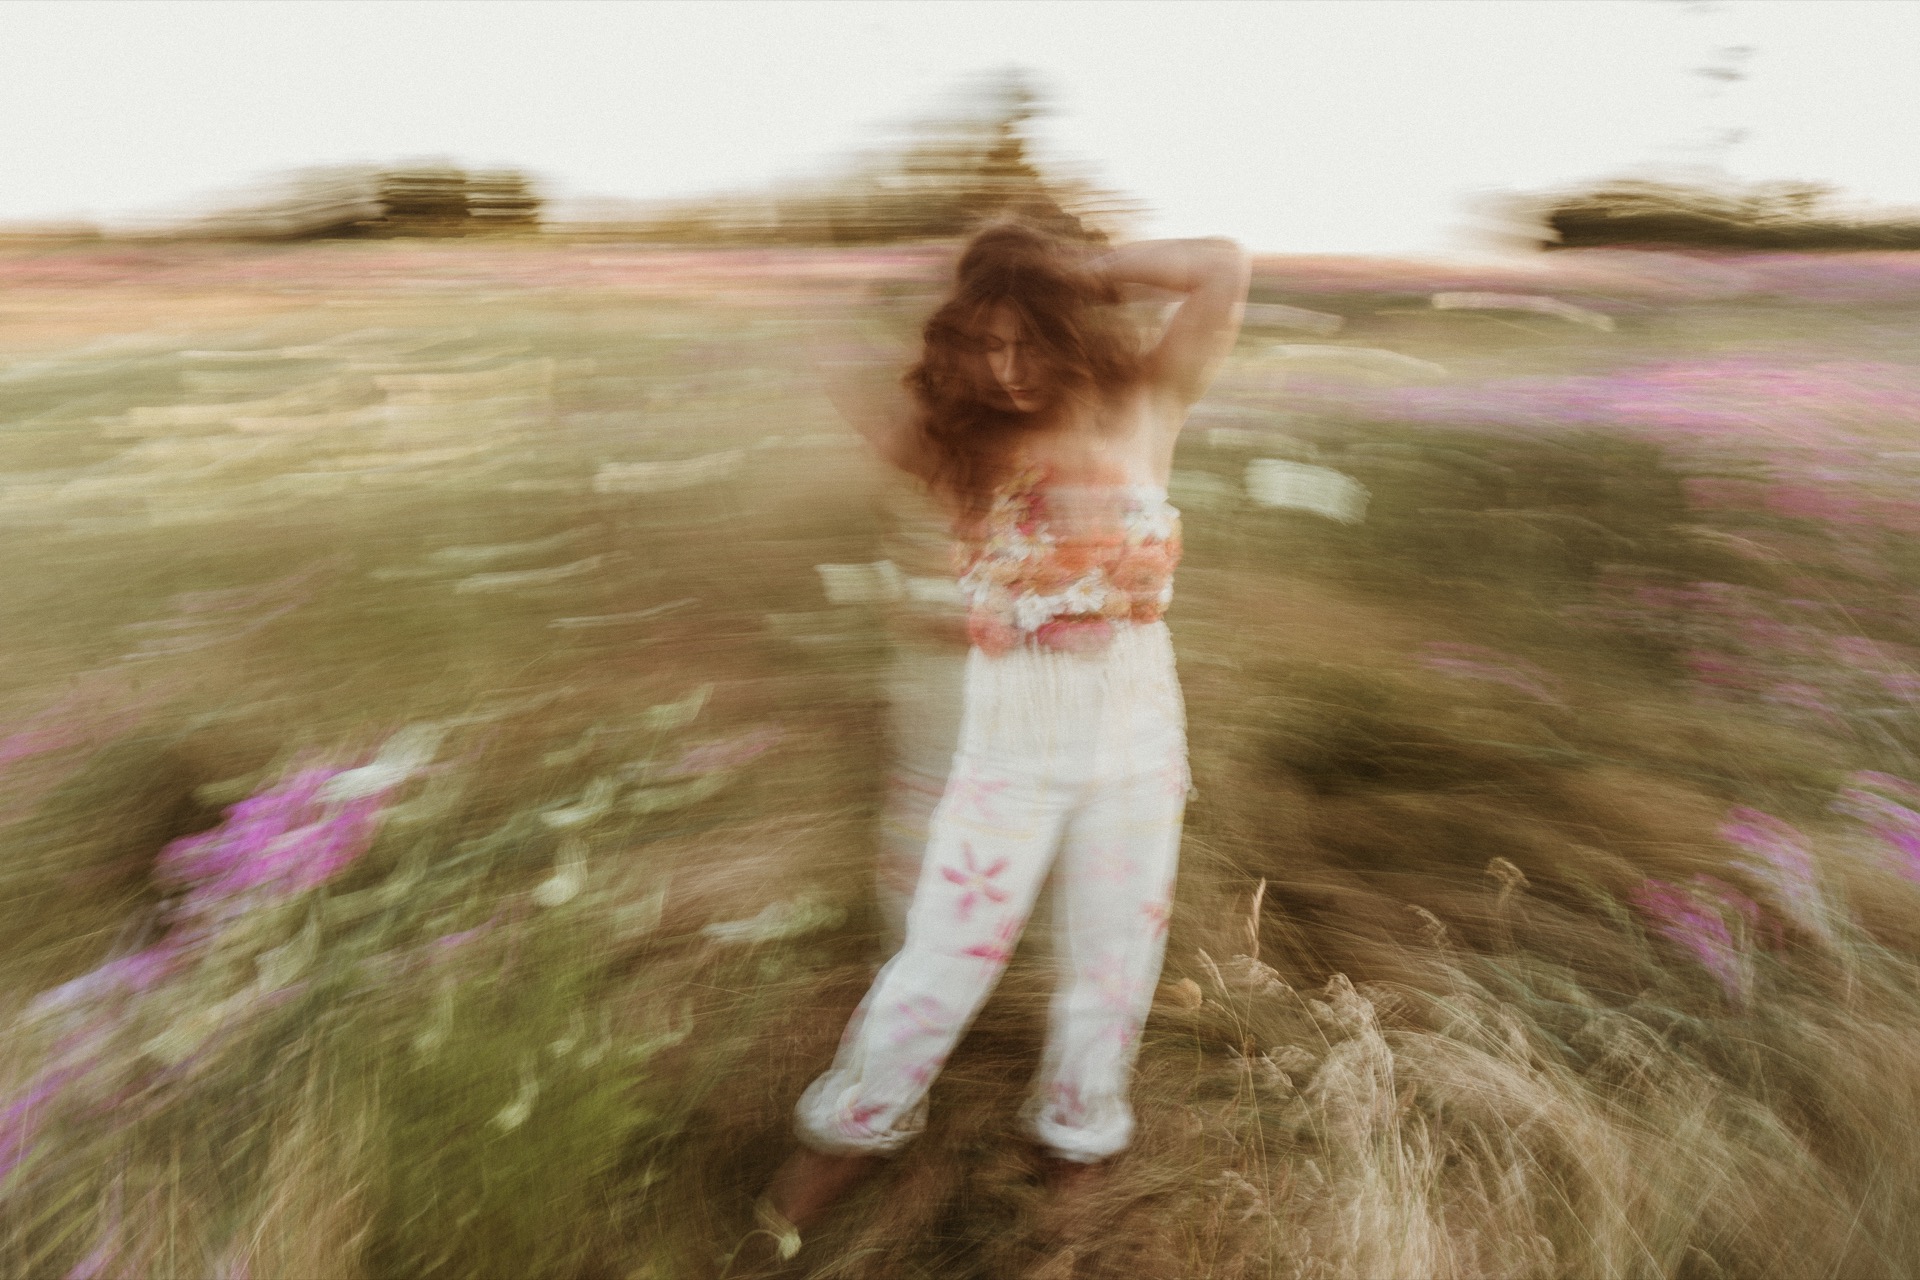 A portrait of a female wearing floral top spinning in field at Discovery Park near Seattle, WA.